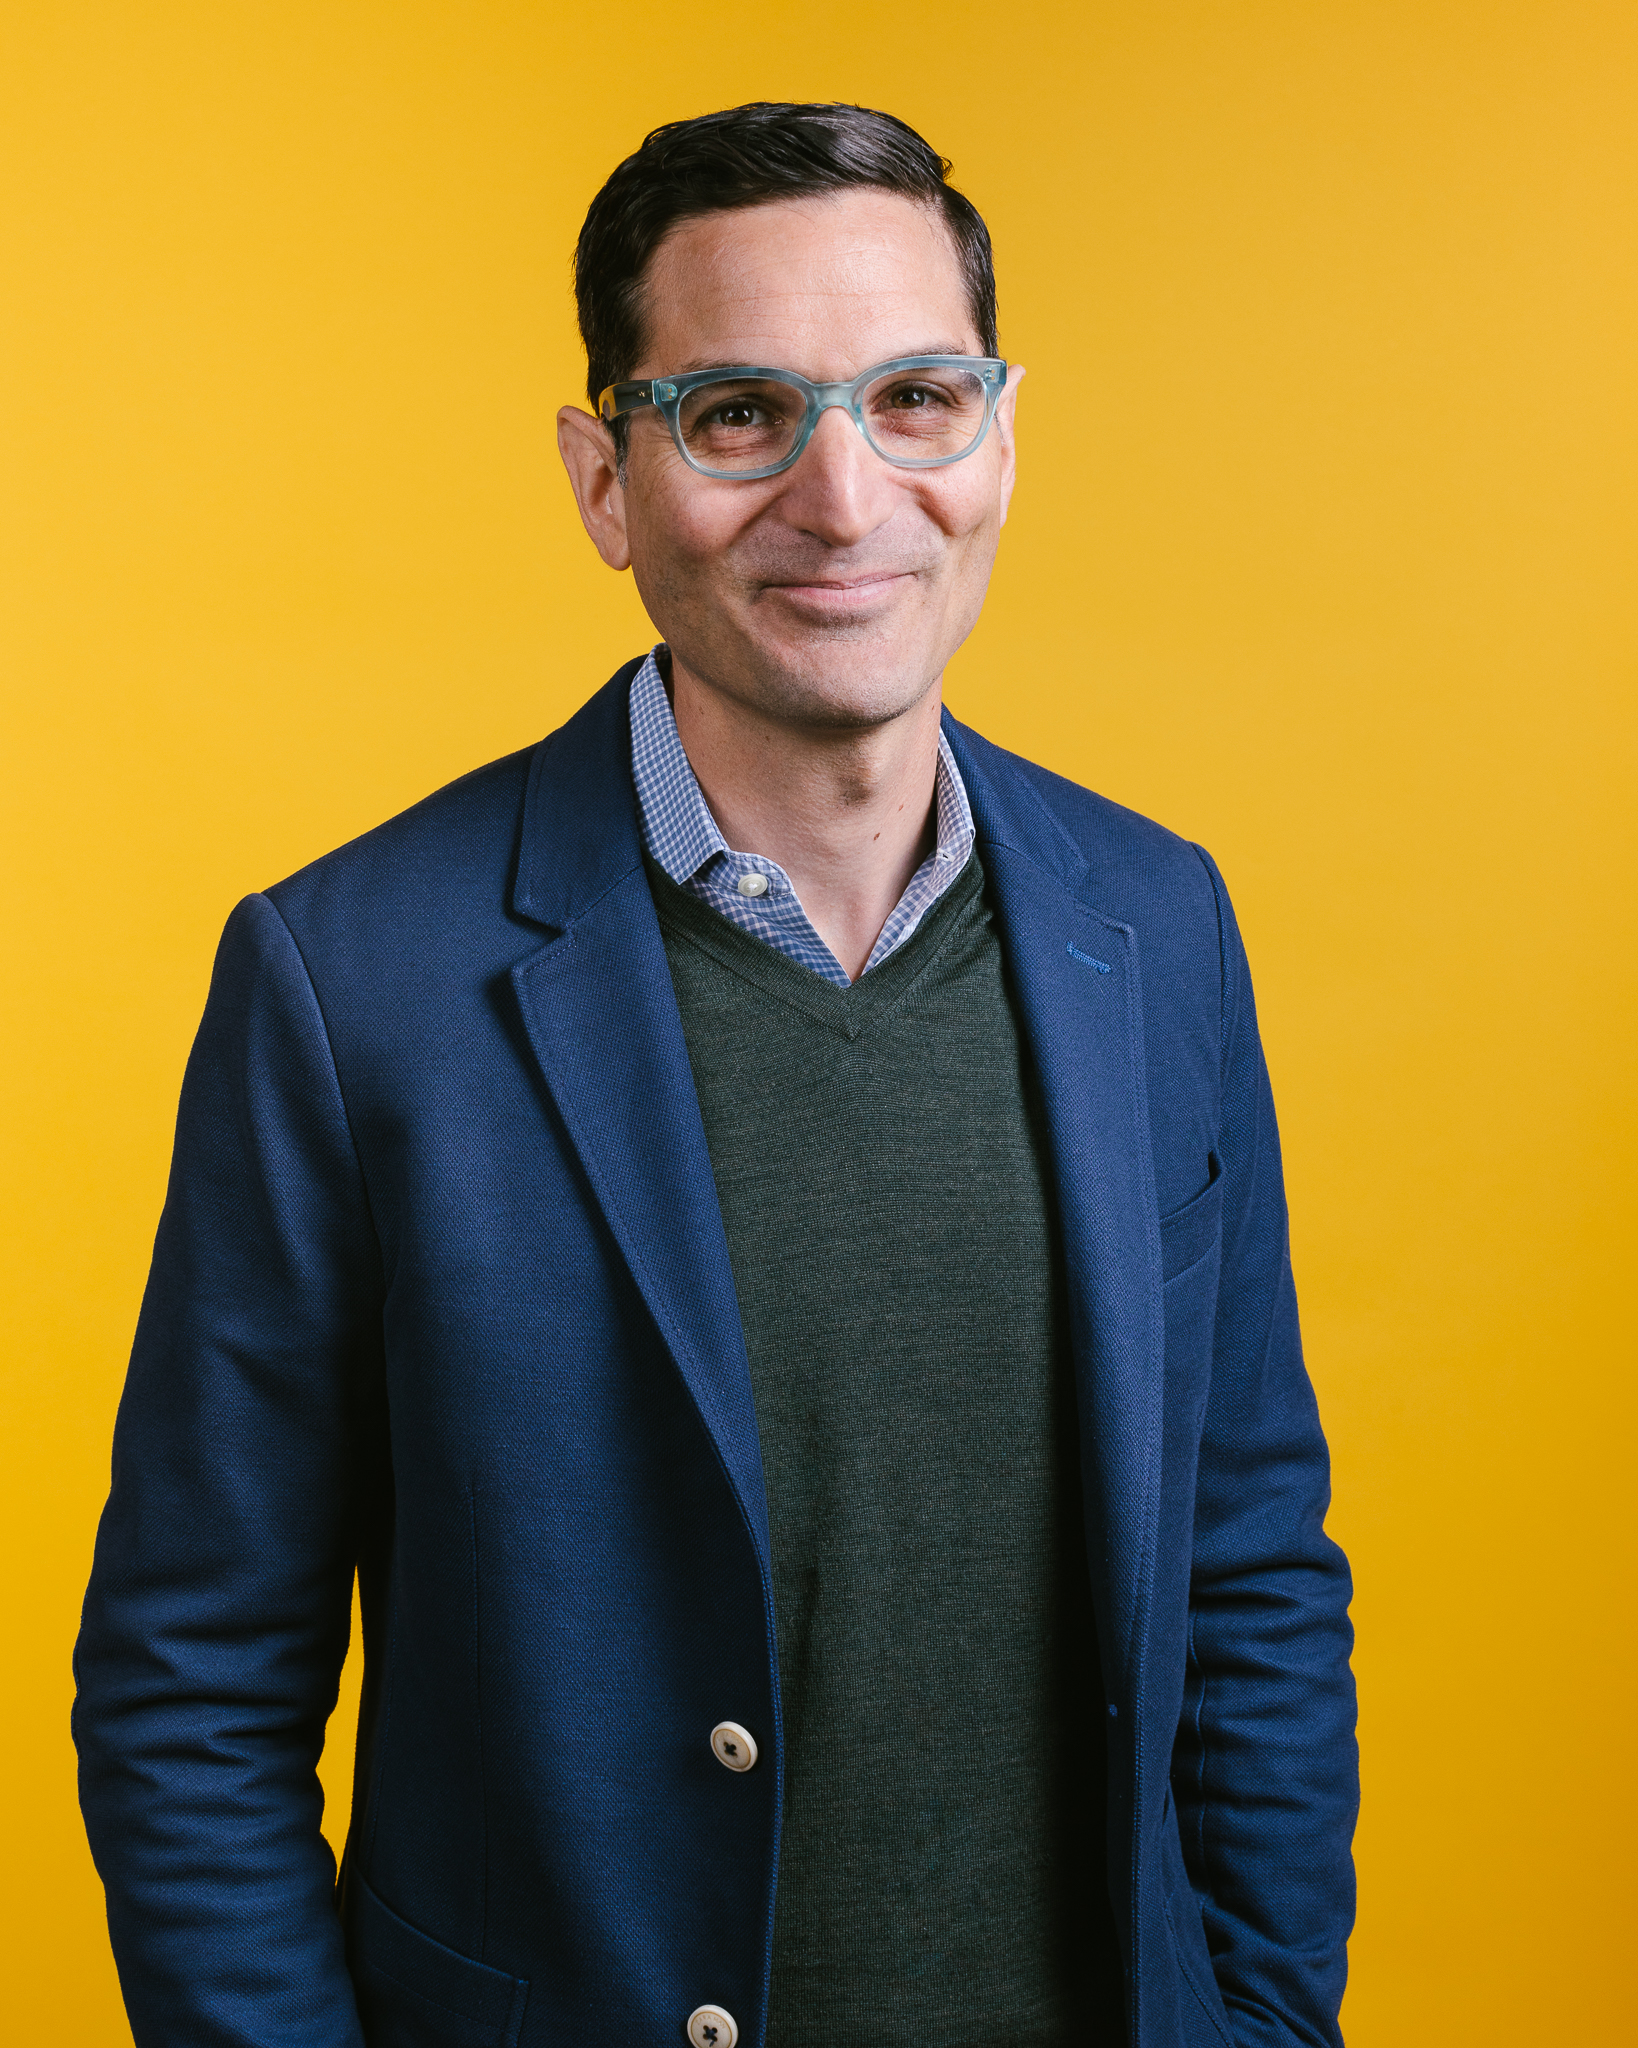 Cover image for  article: NPR's Guy Raz Cranks Out New Shows